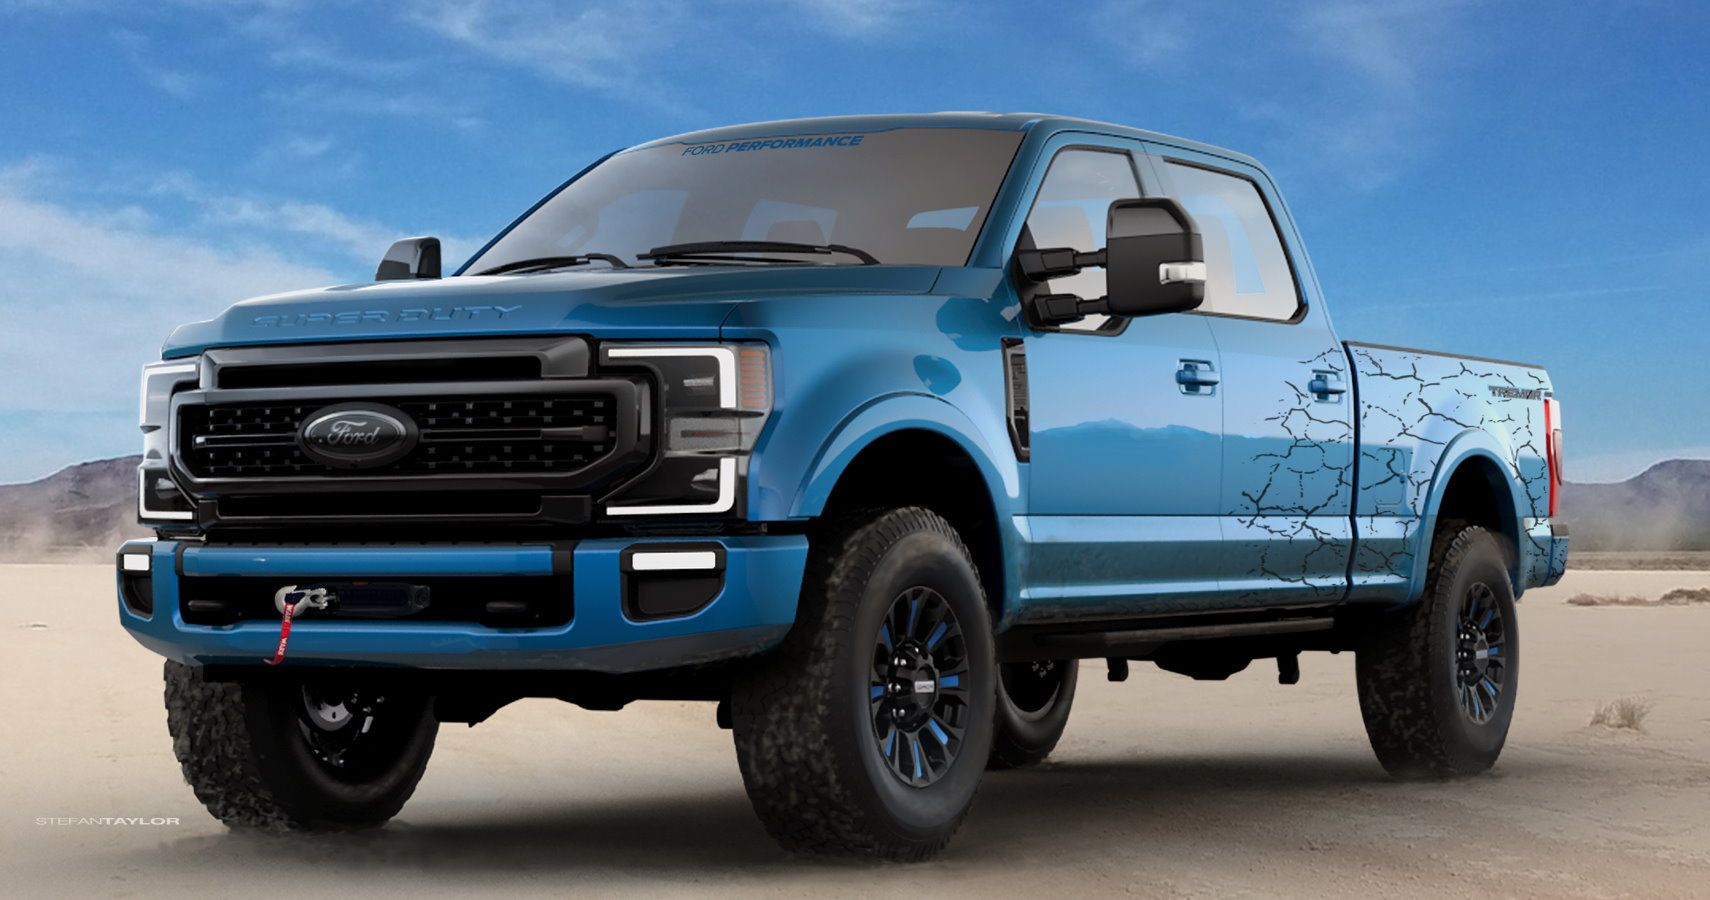 Check Out These Amazing Custom Ford Super Duty Pickups Going To SEMA